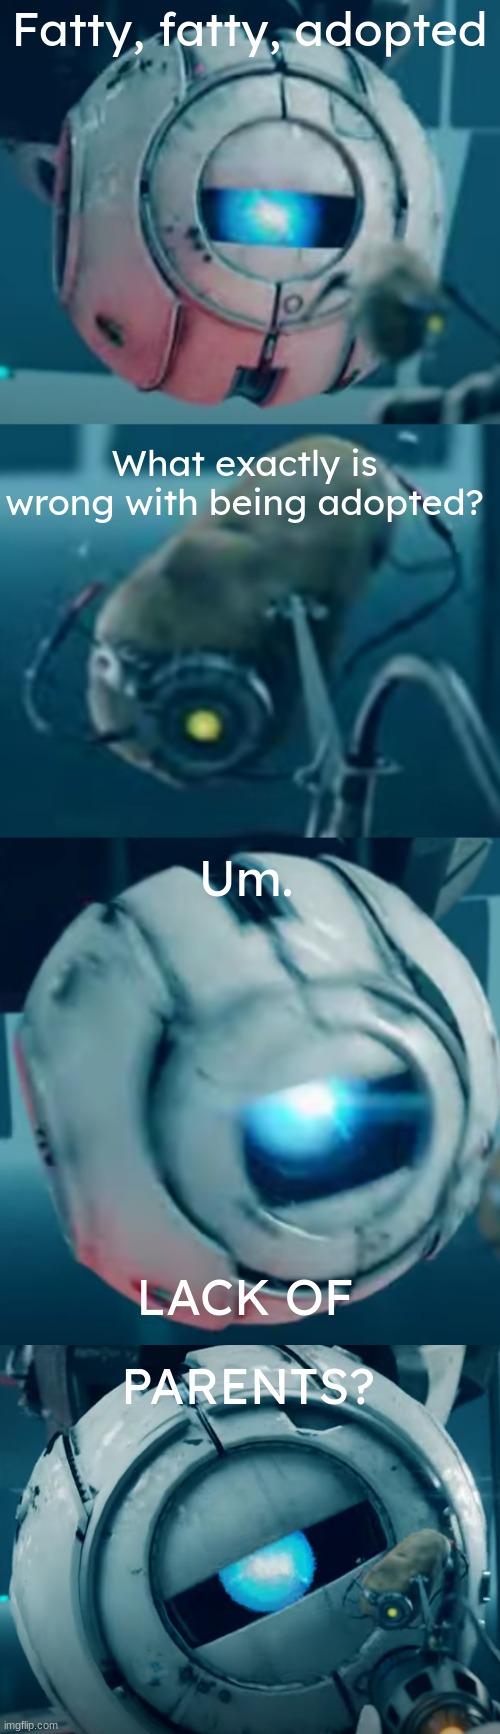 my favorite moment in the whole game | Fatty, fatty, adopted; What exactly is wrong with being adopted? Um. LACK OF; PARENTS? | image tagged in valve,portal 2,gaming,memes | made w/ Imgflip meme maker